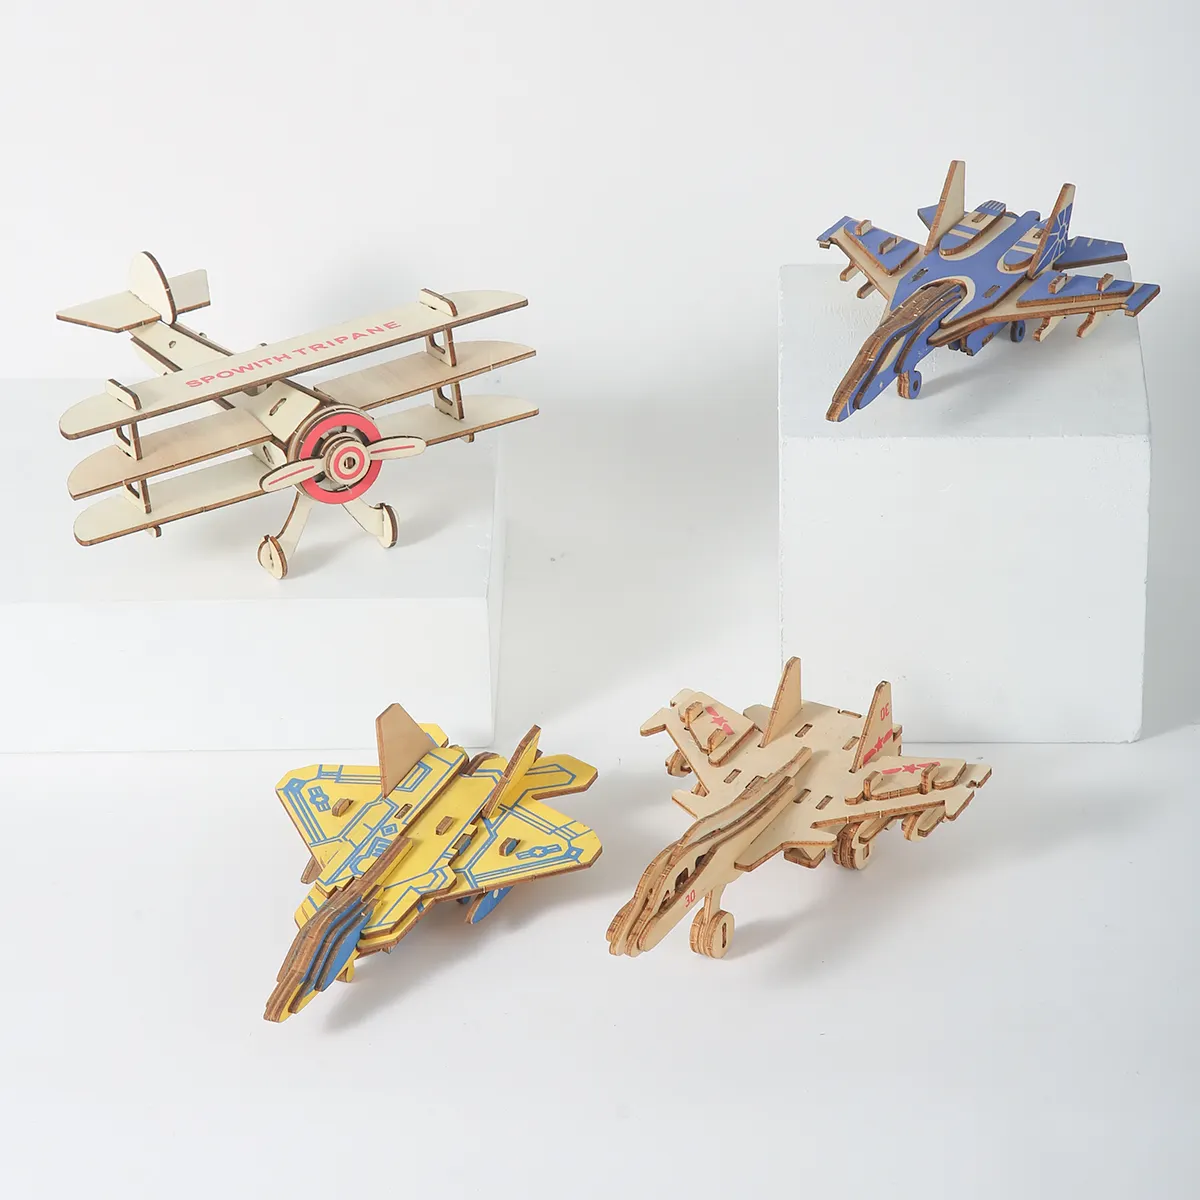 boy's favorite Aircraft Diy puzzles Airplane easy assemble handmade toys for lower age child 3d wooden jigsaw puzzles